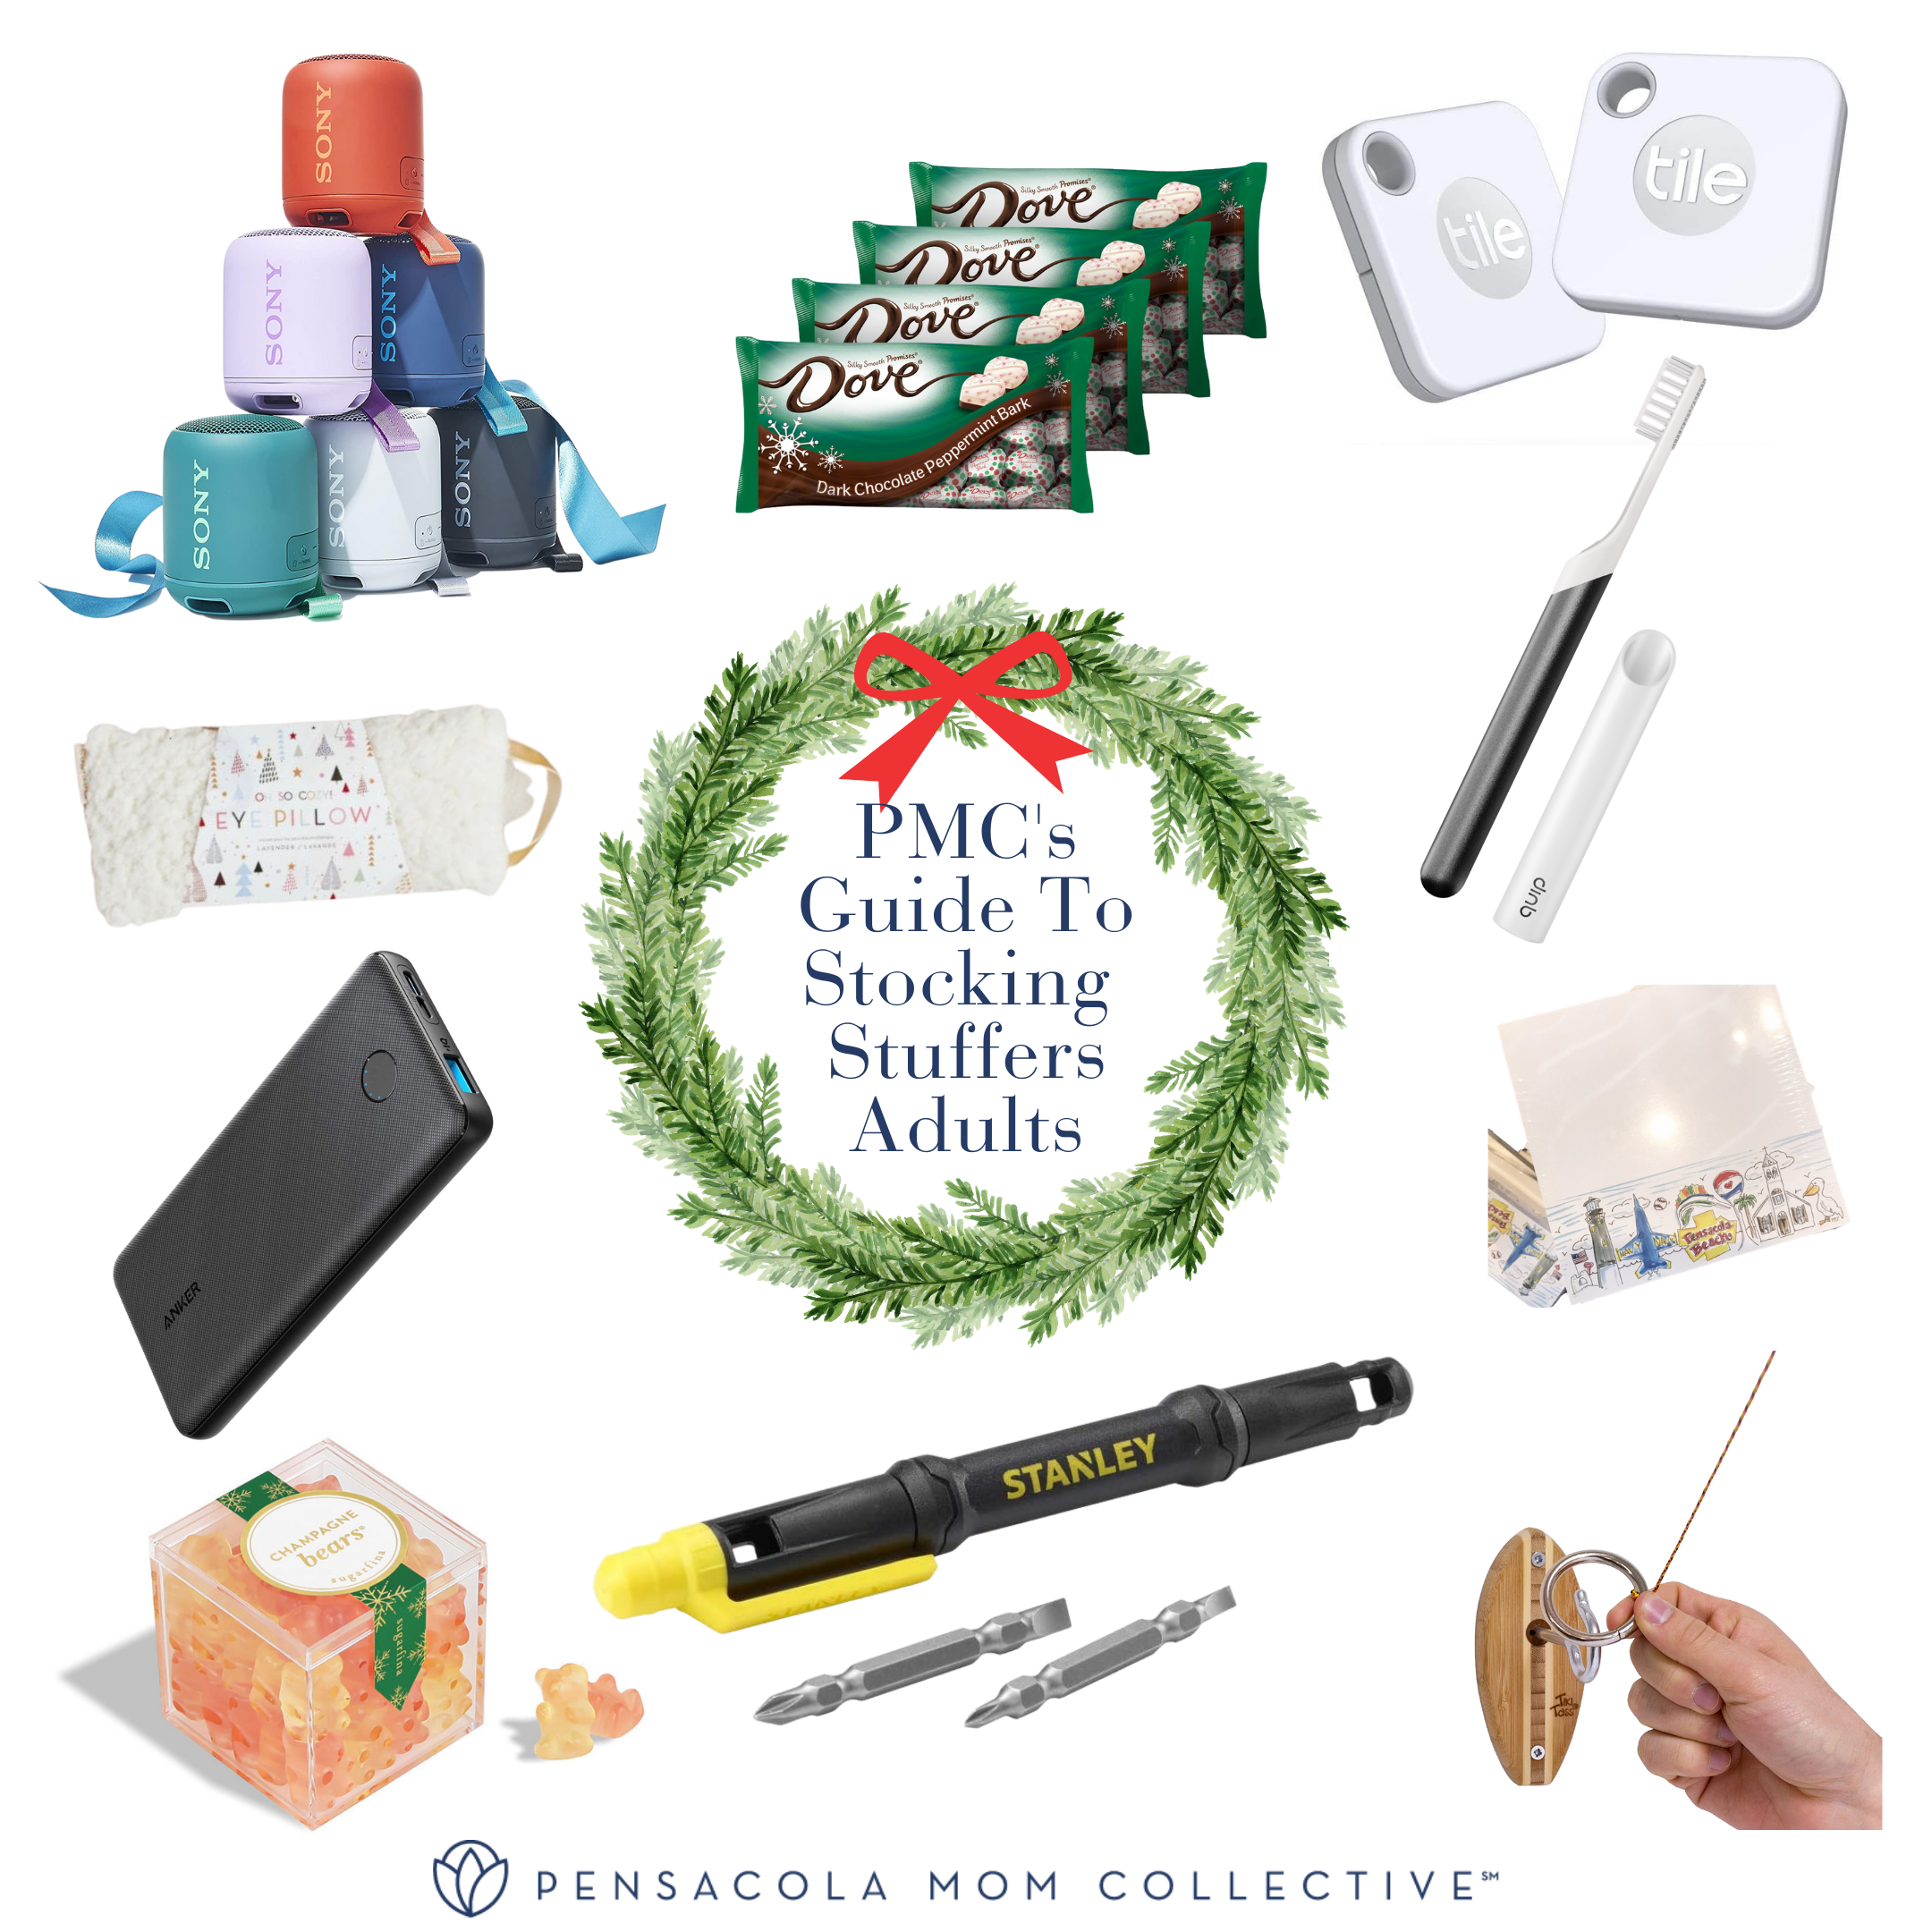 https://pensacola.momcollective.com/wp-content/uploads/2020/11/PMCs-Gift-Guide-stocking-stuffers-ADULT.png